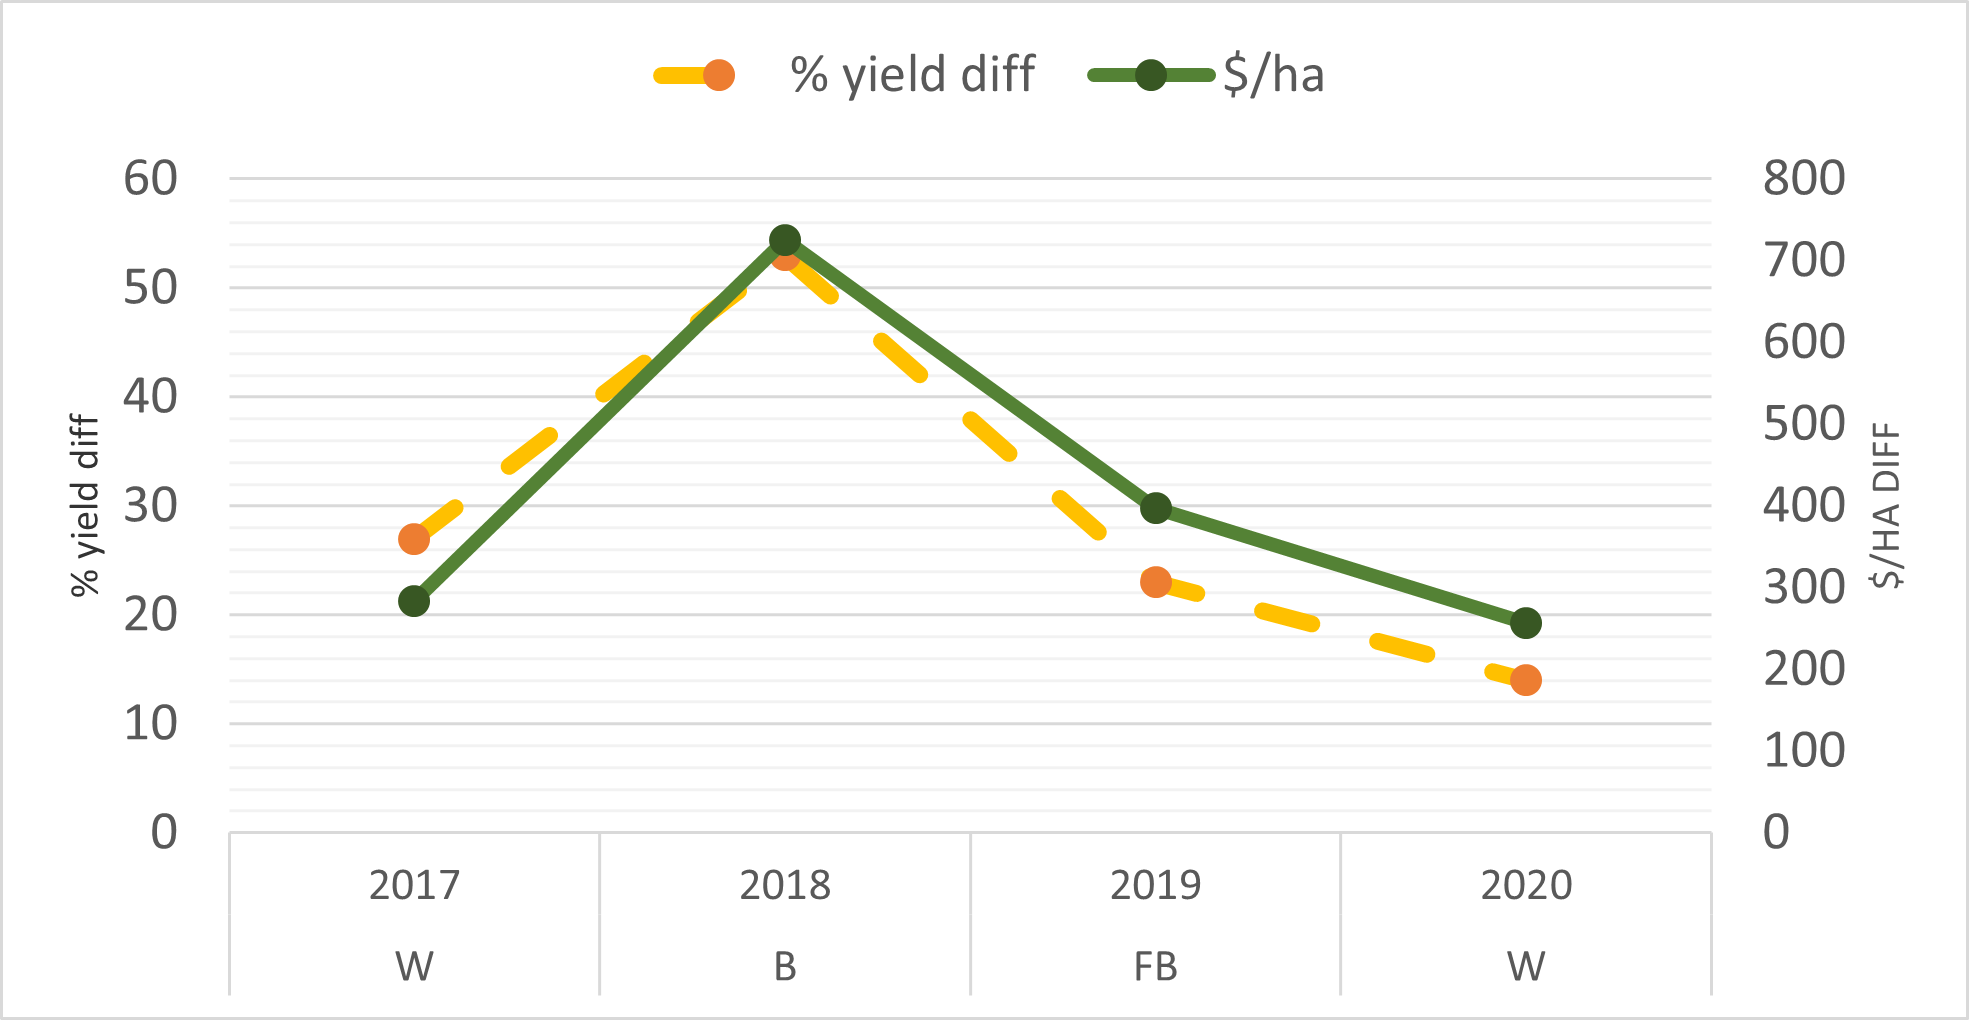 This line graph illustrates the estimated impact of using Trt 1 (deep placement of pea straw + gypsum + NPK) as the % change in yield and gross margin ($/ha) when compared to grower standard practice